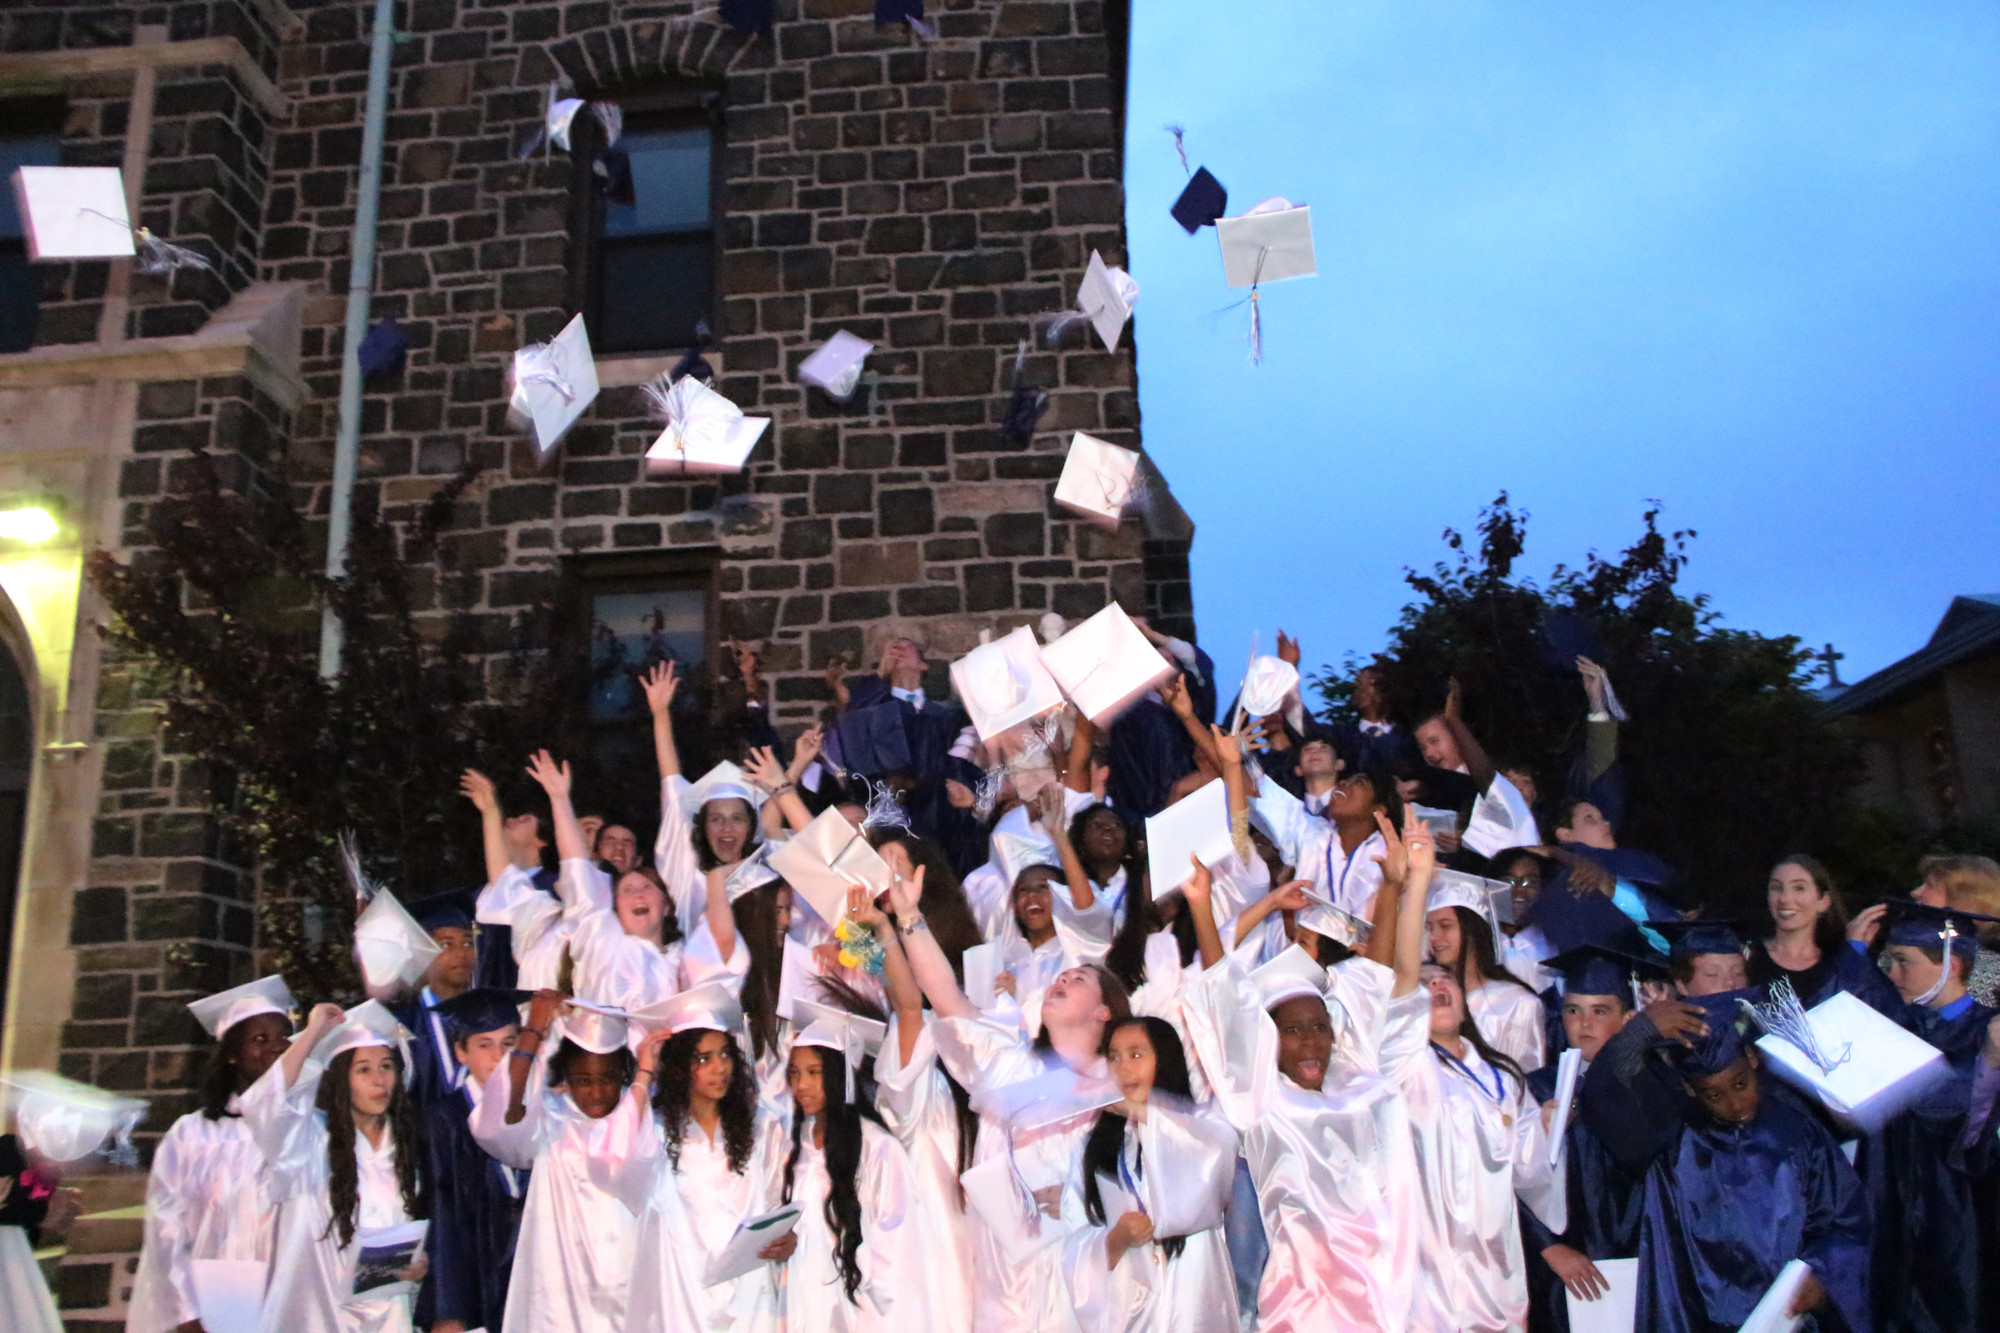 St. Christopher’s Class of 2014, tossed their caps into the sky last week following their graducation ceremony.